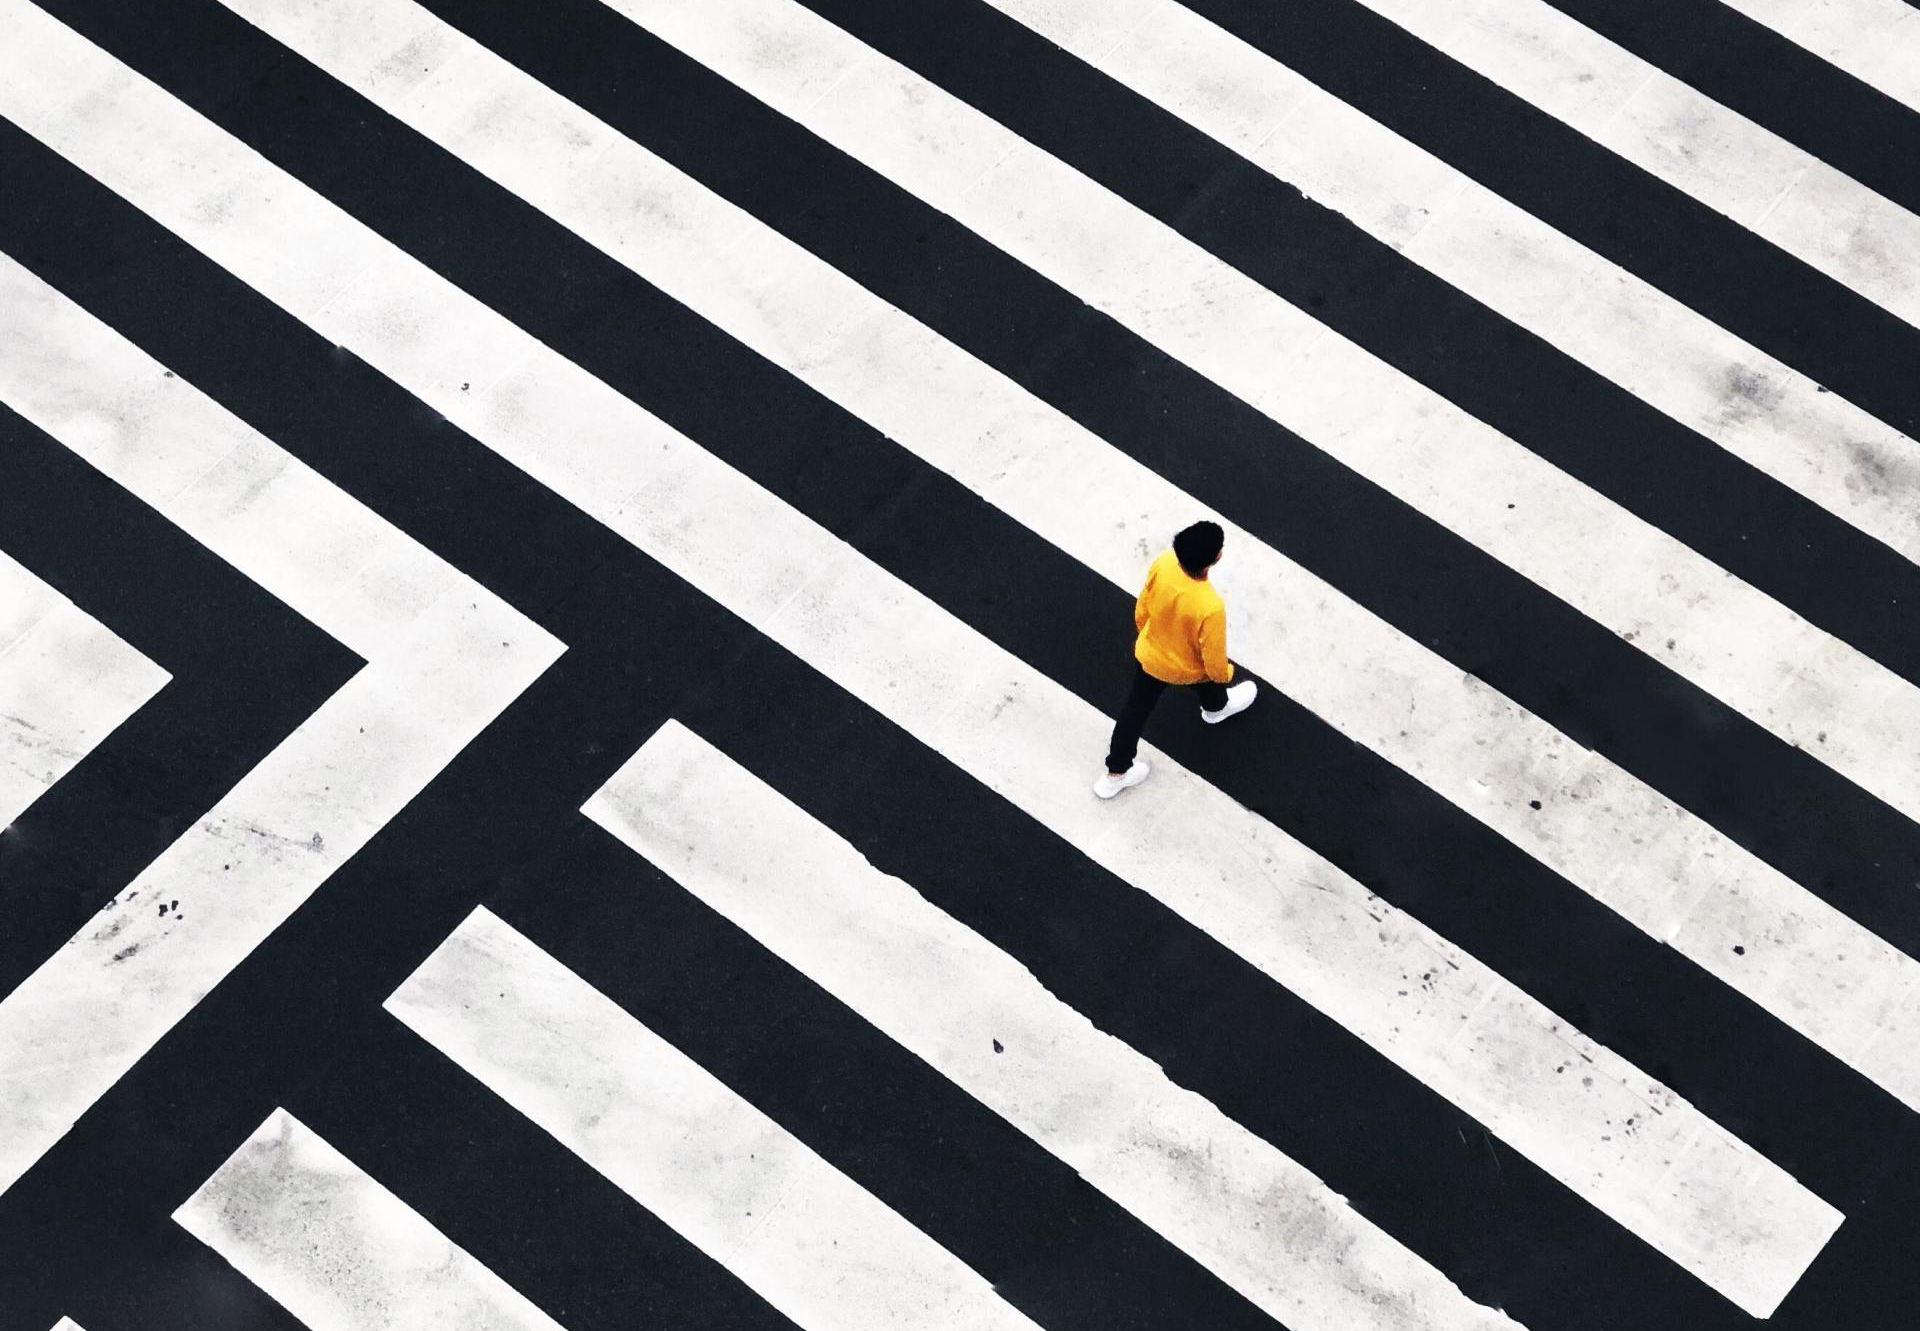 Image of black and white lines on a street with a person in yellow walking through frame